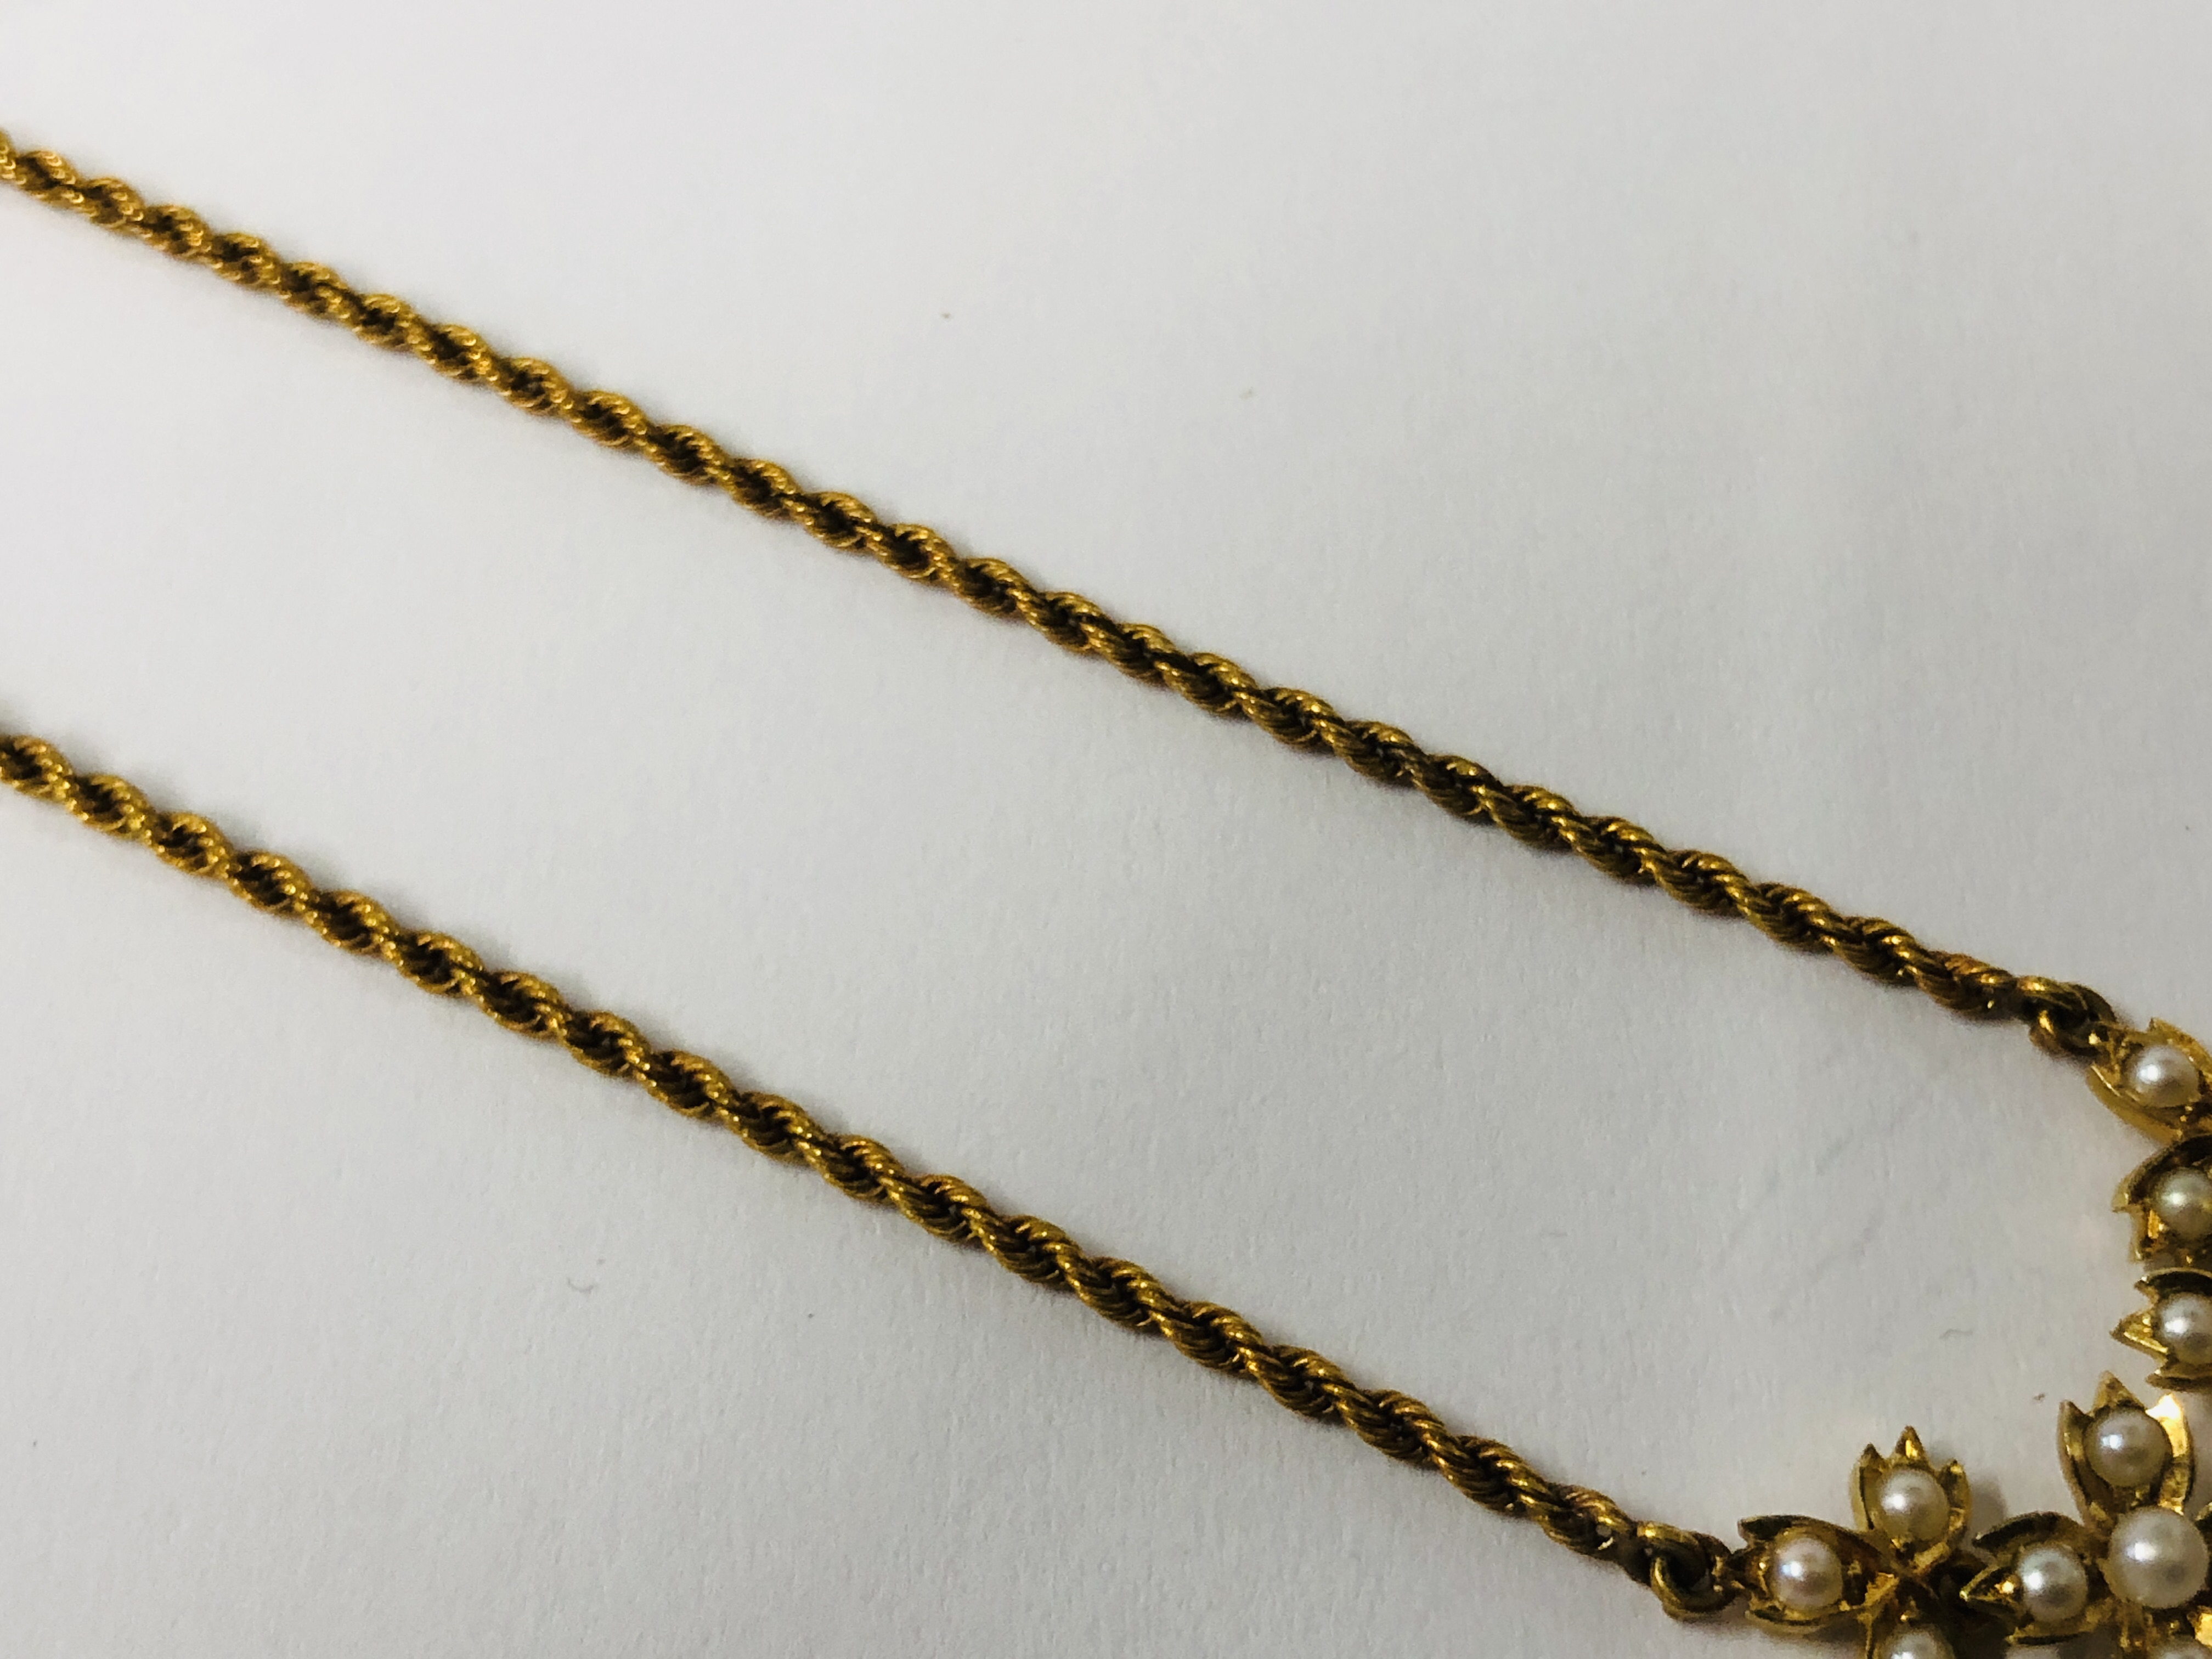 AN ANTIQUE CHILD'S YELLOW METAL ROPE DESIGN NECKLACE SET WITH SEED PEARLS, LENGTH 31CM. - Image 3 of 9